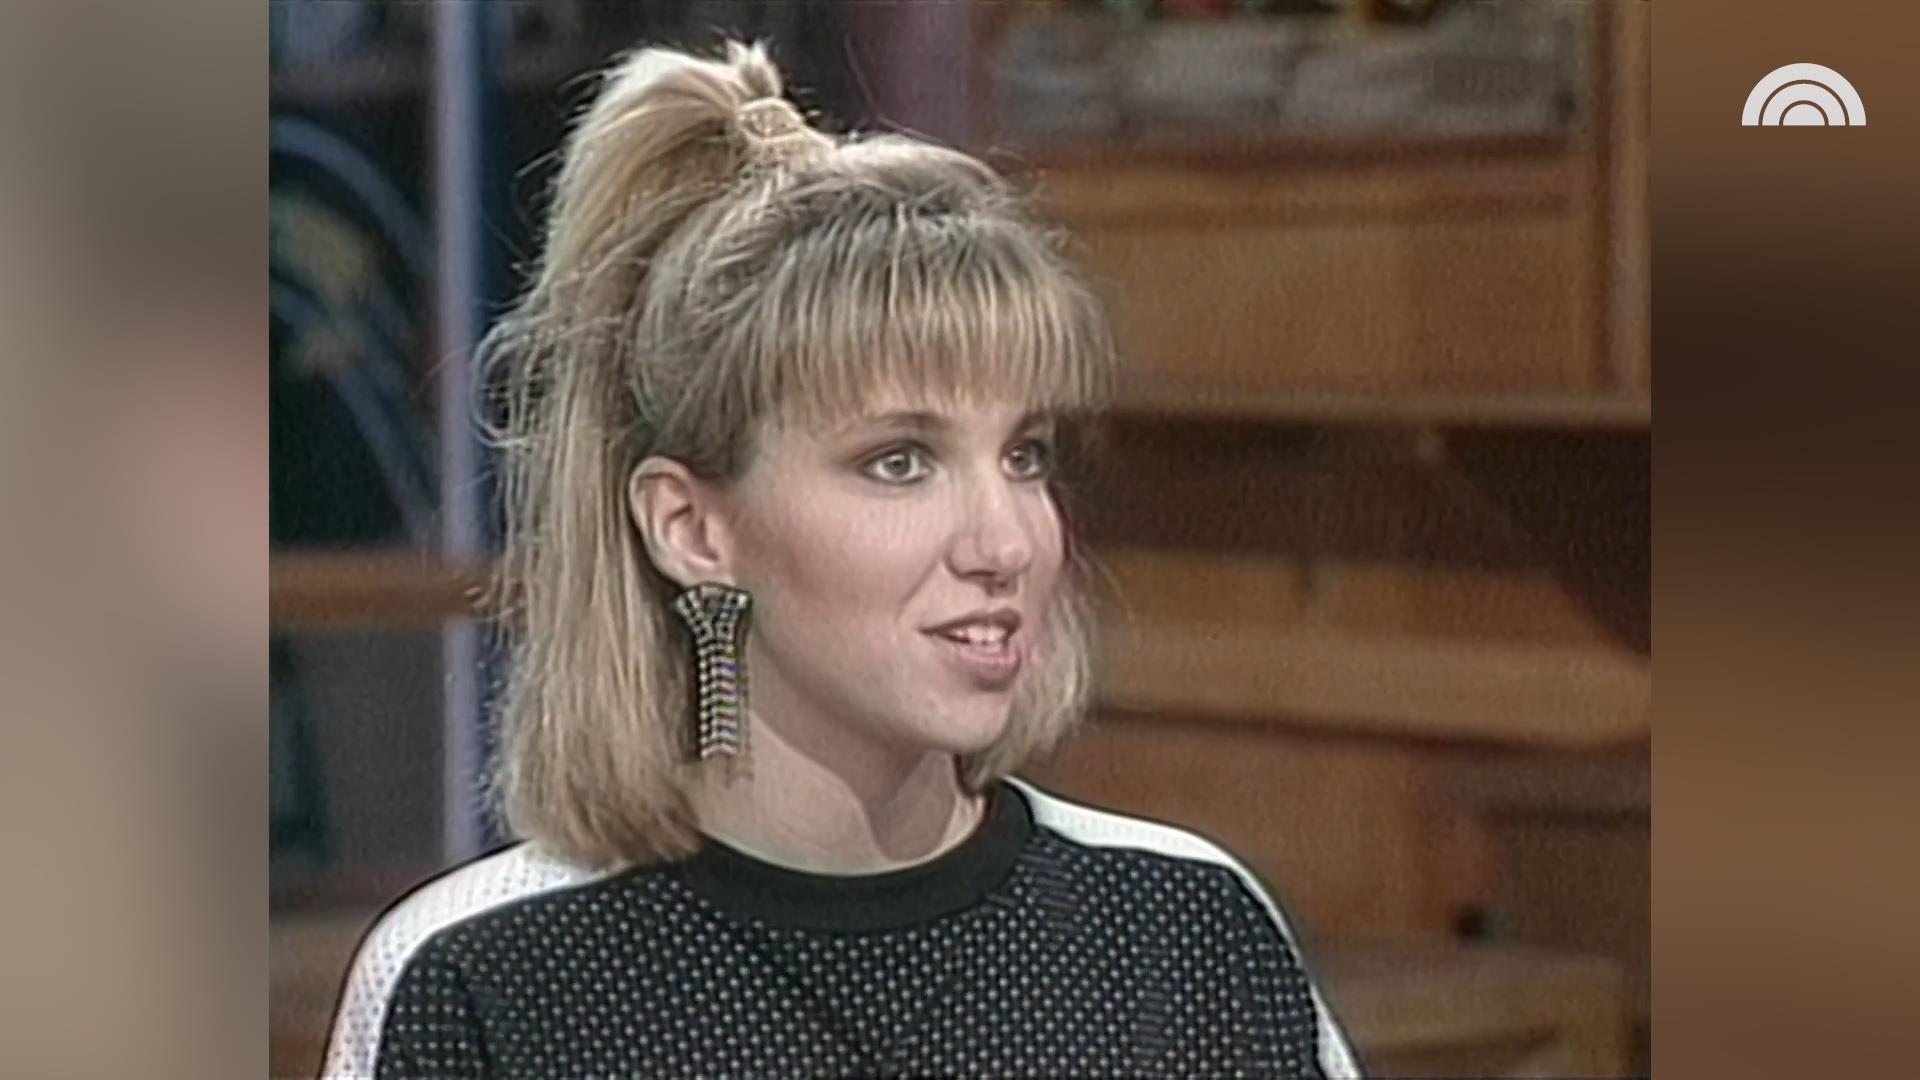 Pictures of debbie gibson